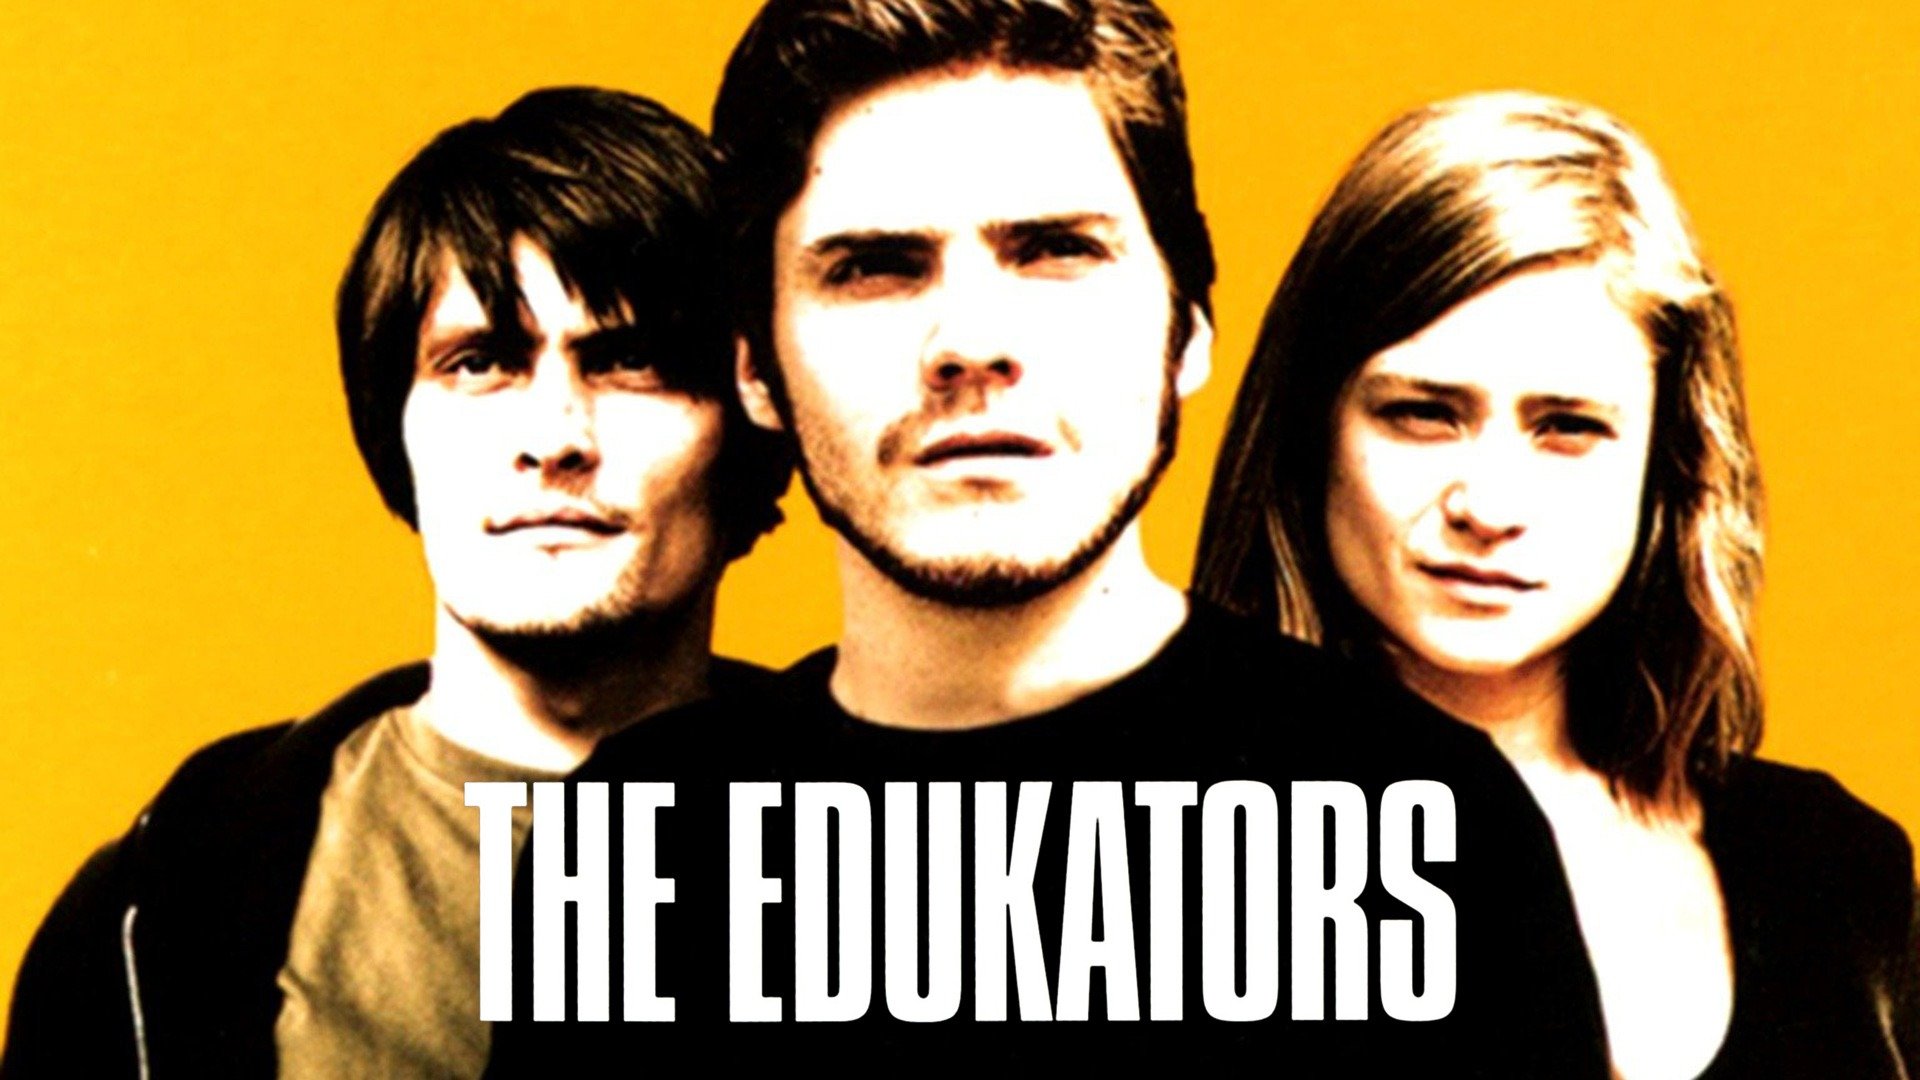 32-facts-about-the-movie-the-edukators